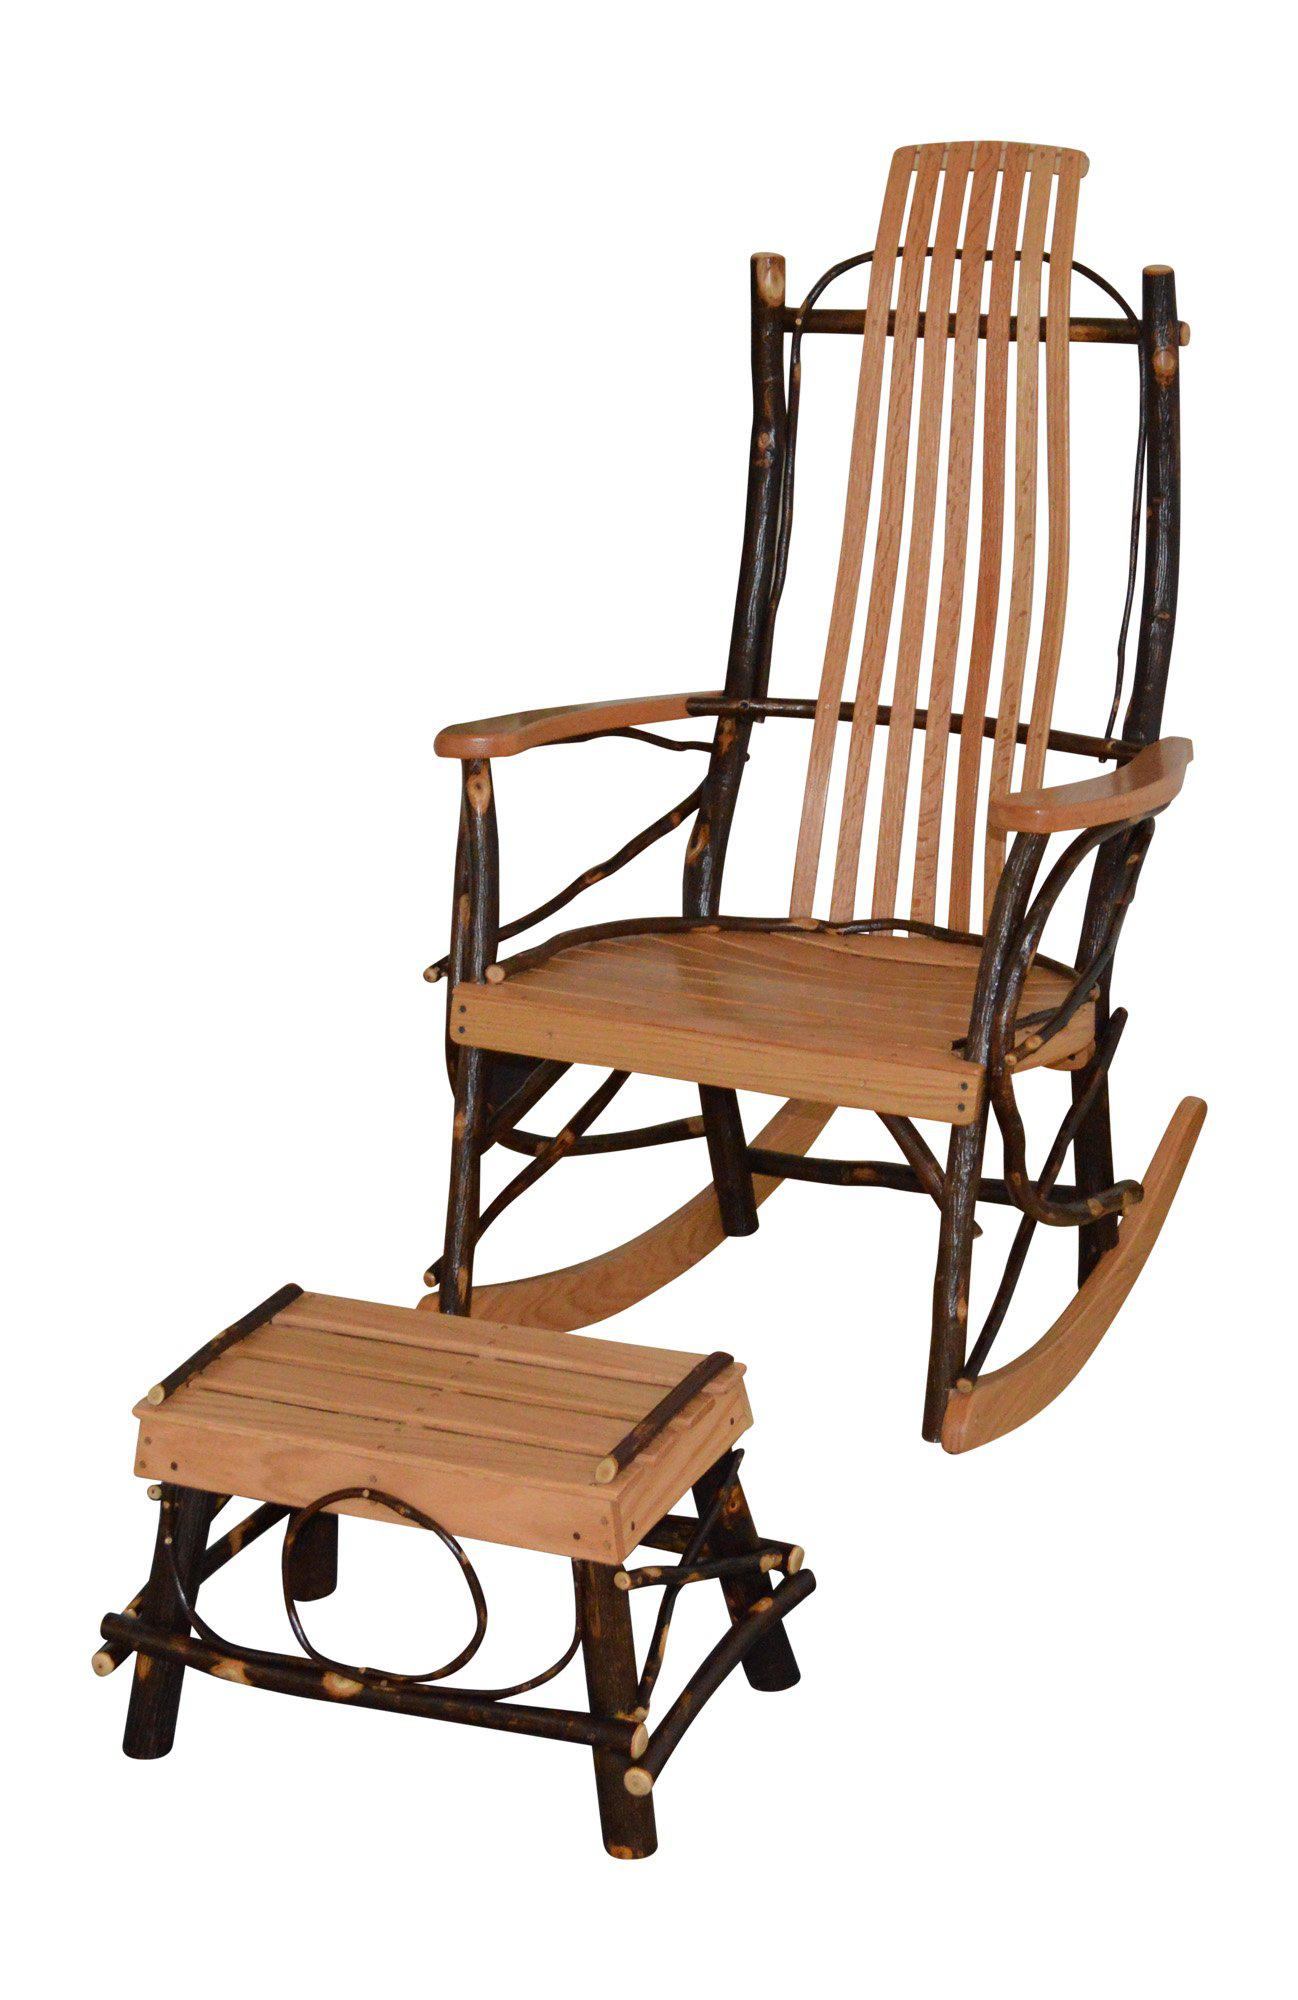 A&L Furniture Co. Amish Bentwood. 7-Slat Hickory Rocking Chair With Foot Stool Set - LEAD TIME TO SHIP 10 BUSINESS DAYS